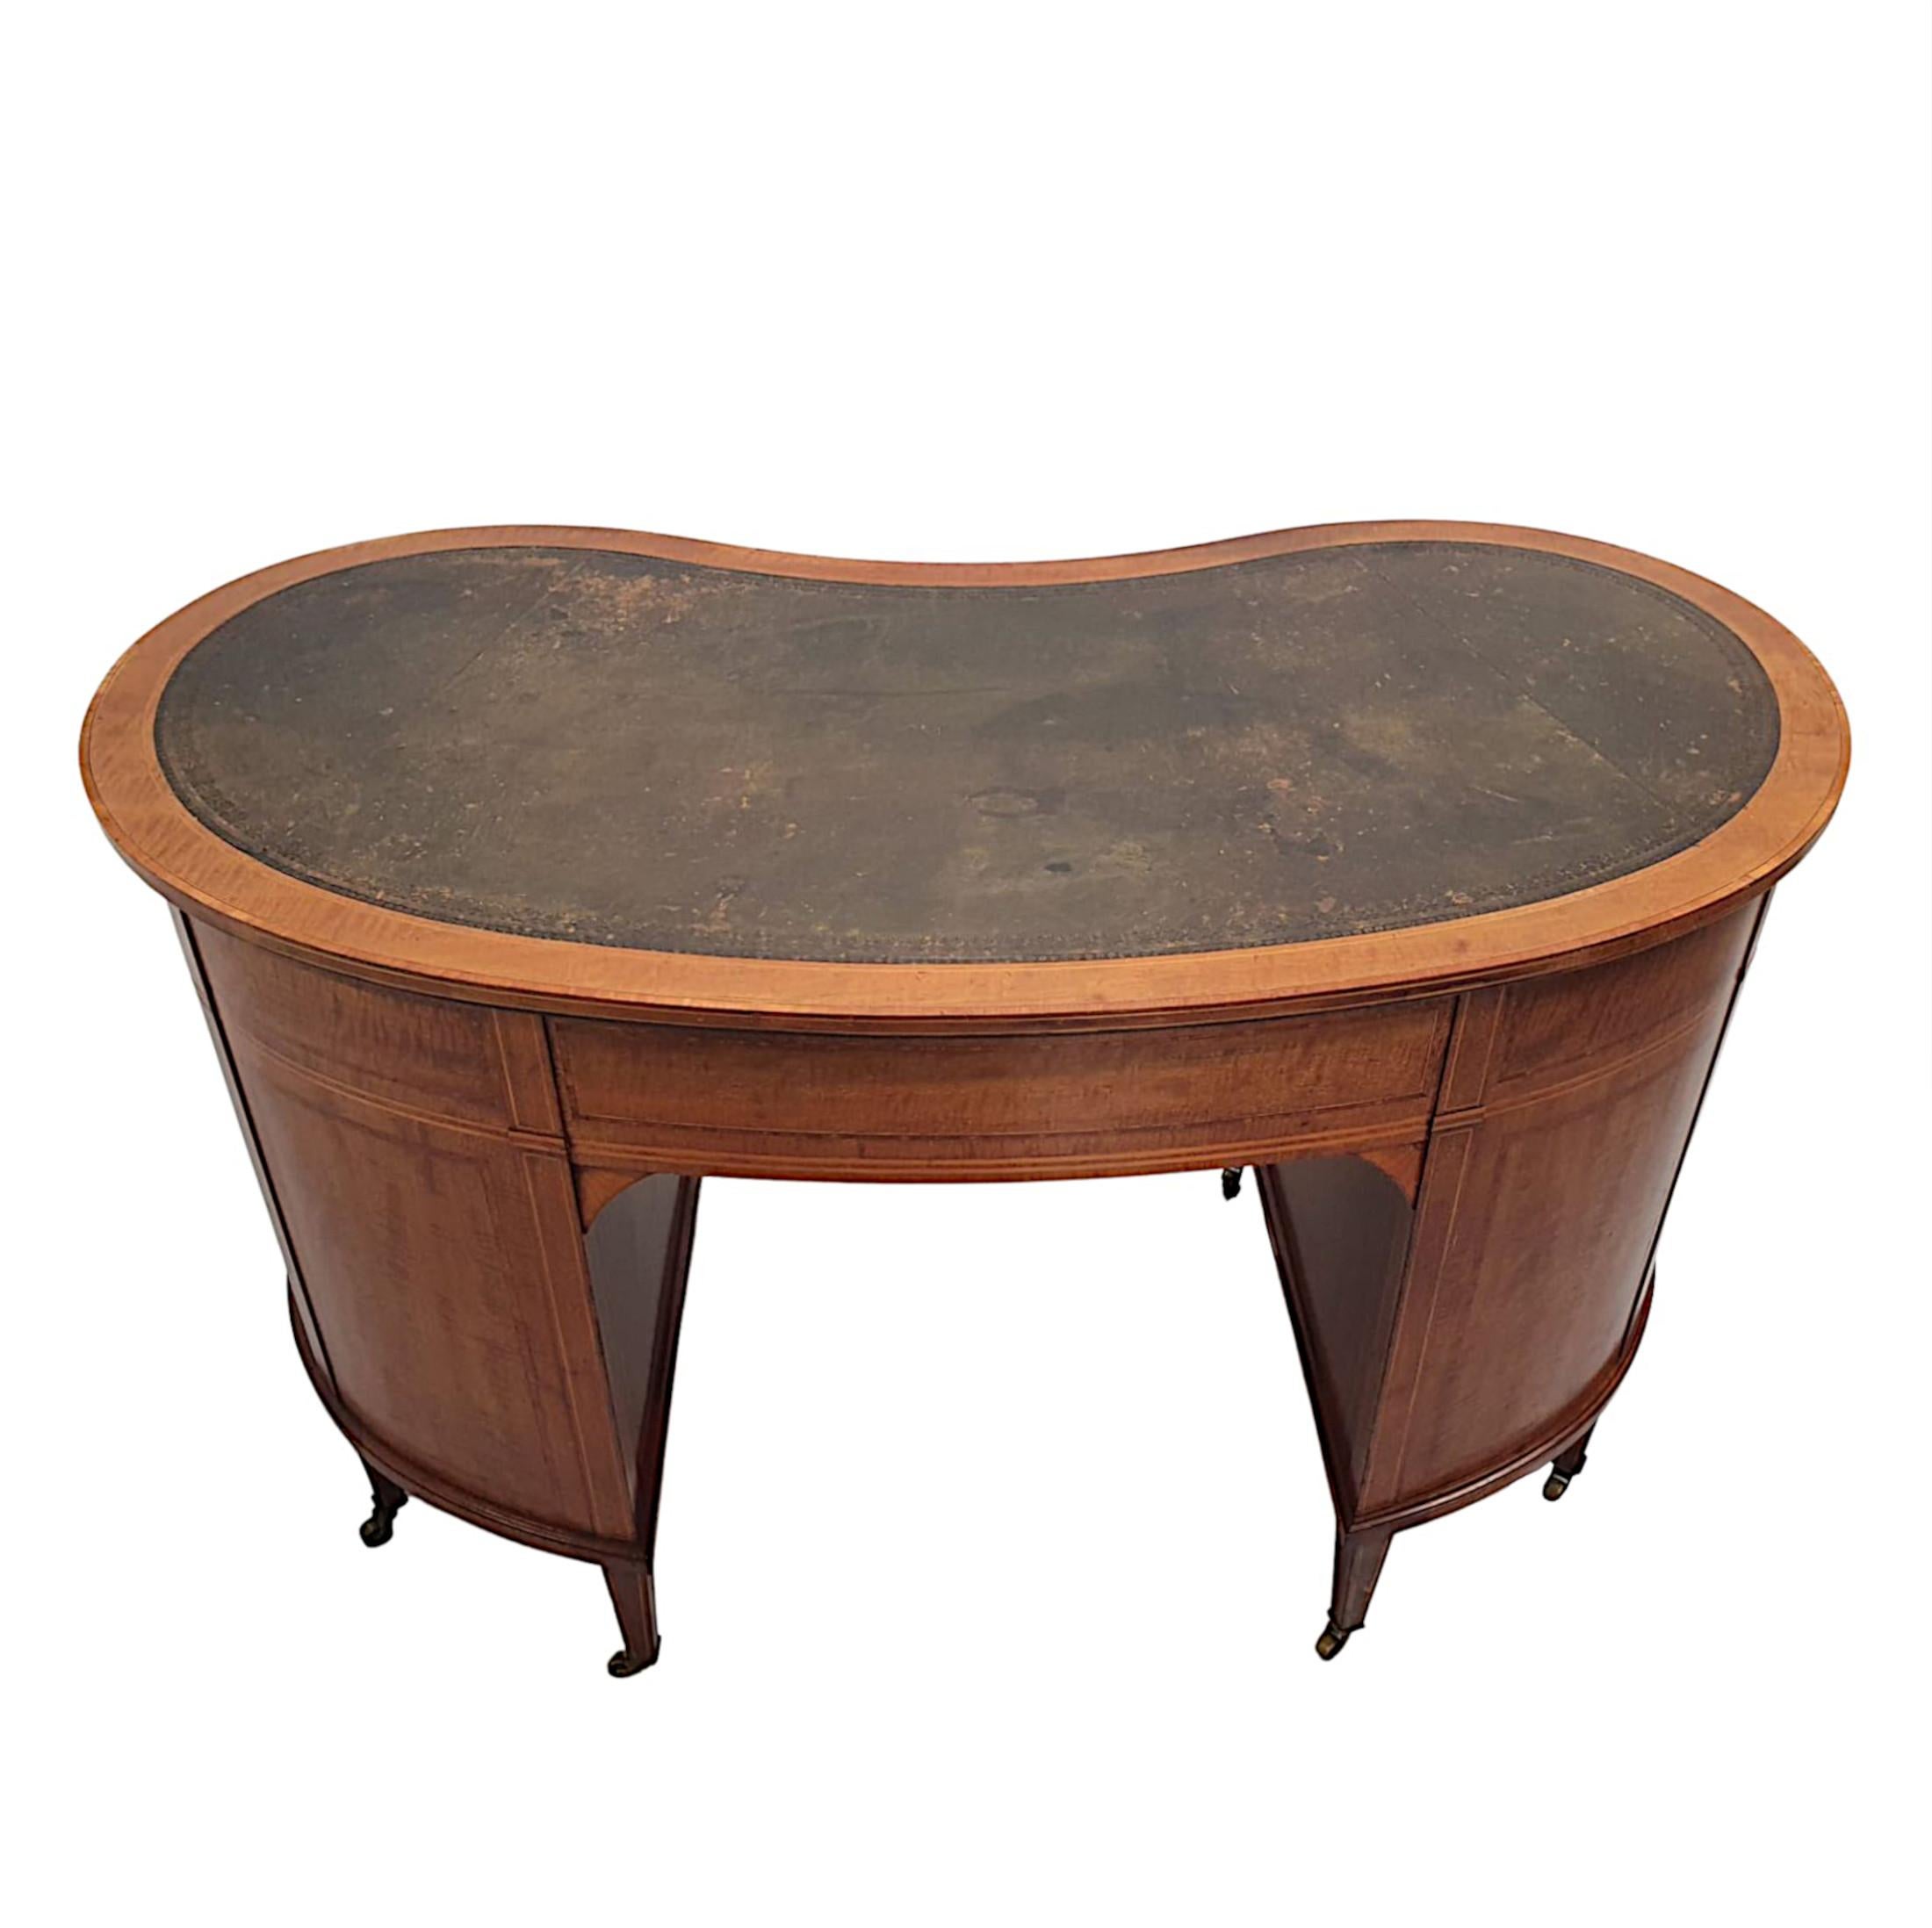 English  A Very Fine Edwardian Leather Top Kidney Shaped Desk For Sale